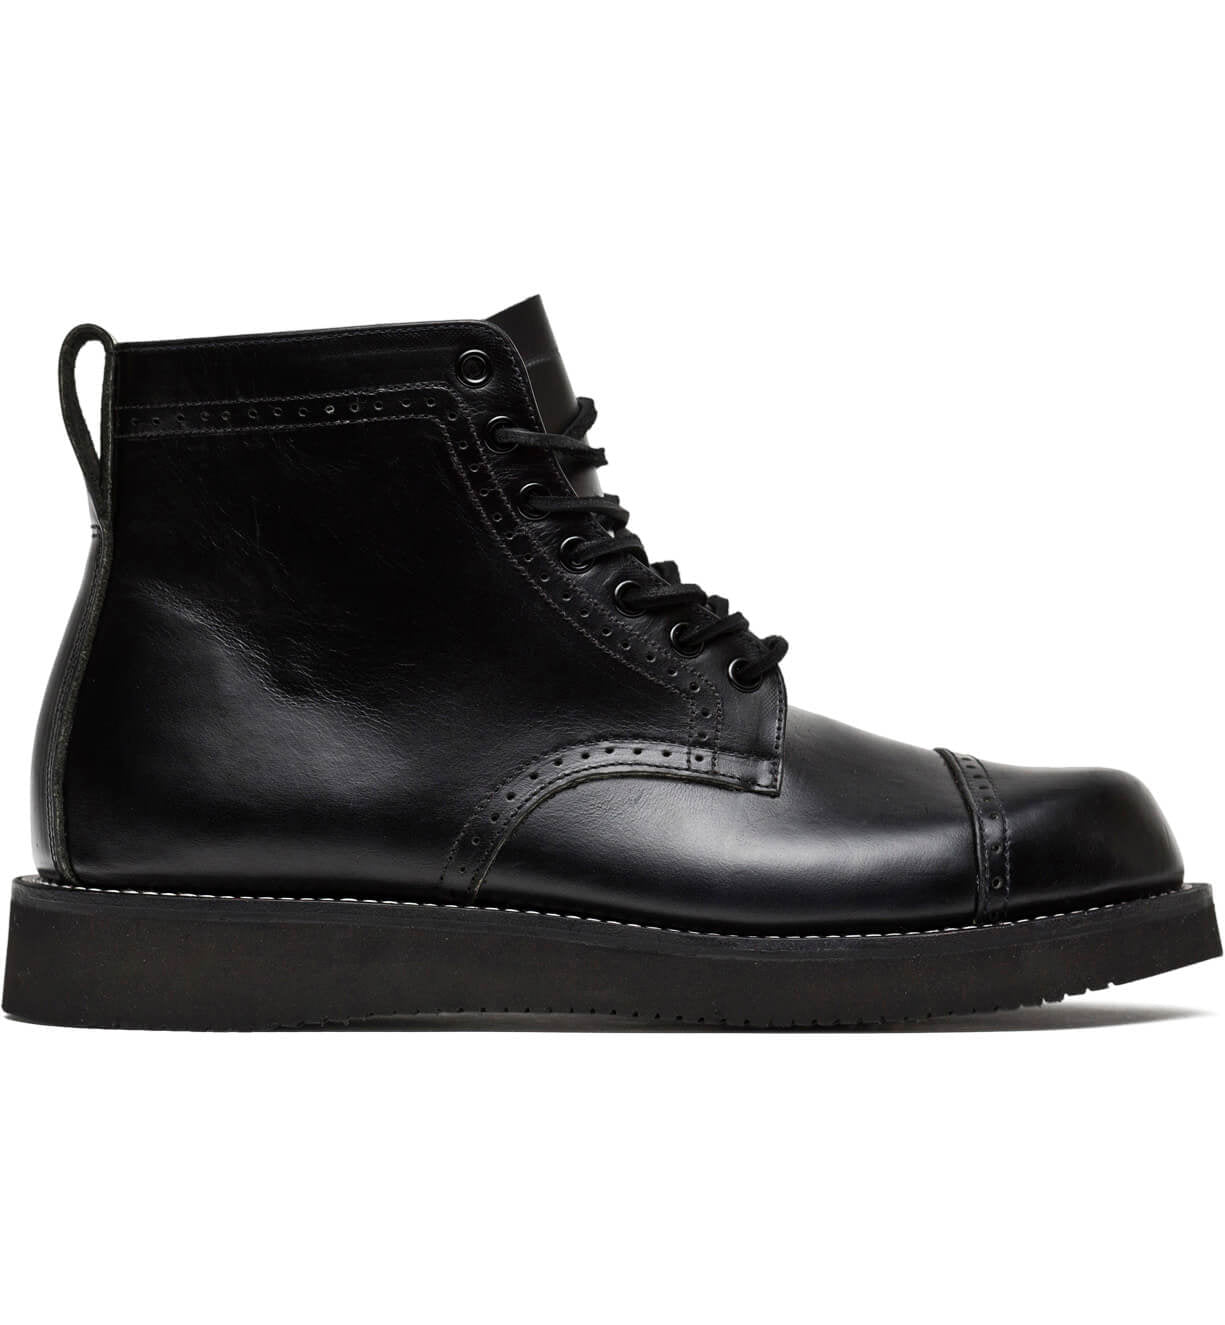 A black leather pair of Aaron boots from the Broken Homme collection featuring a cap toe silhouette, set against a clean white background.